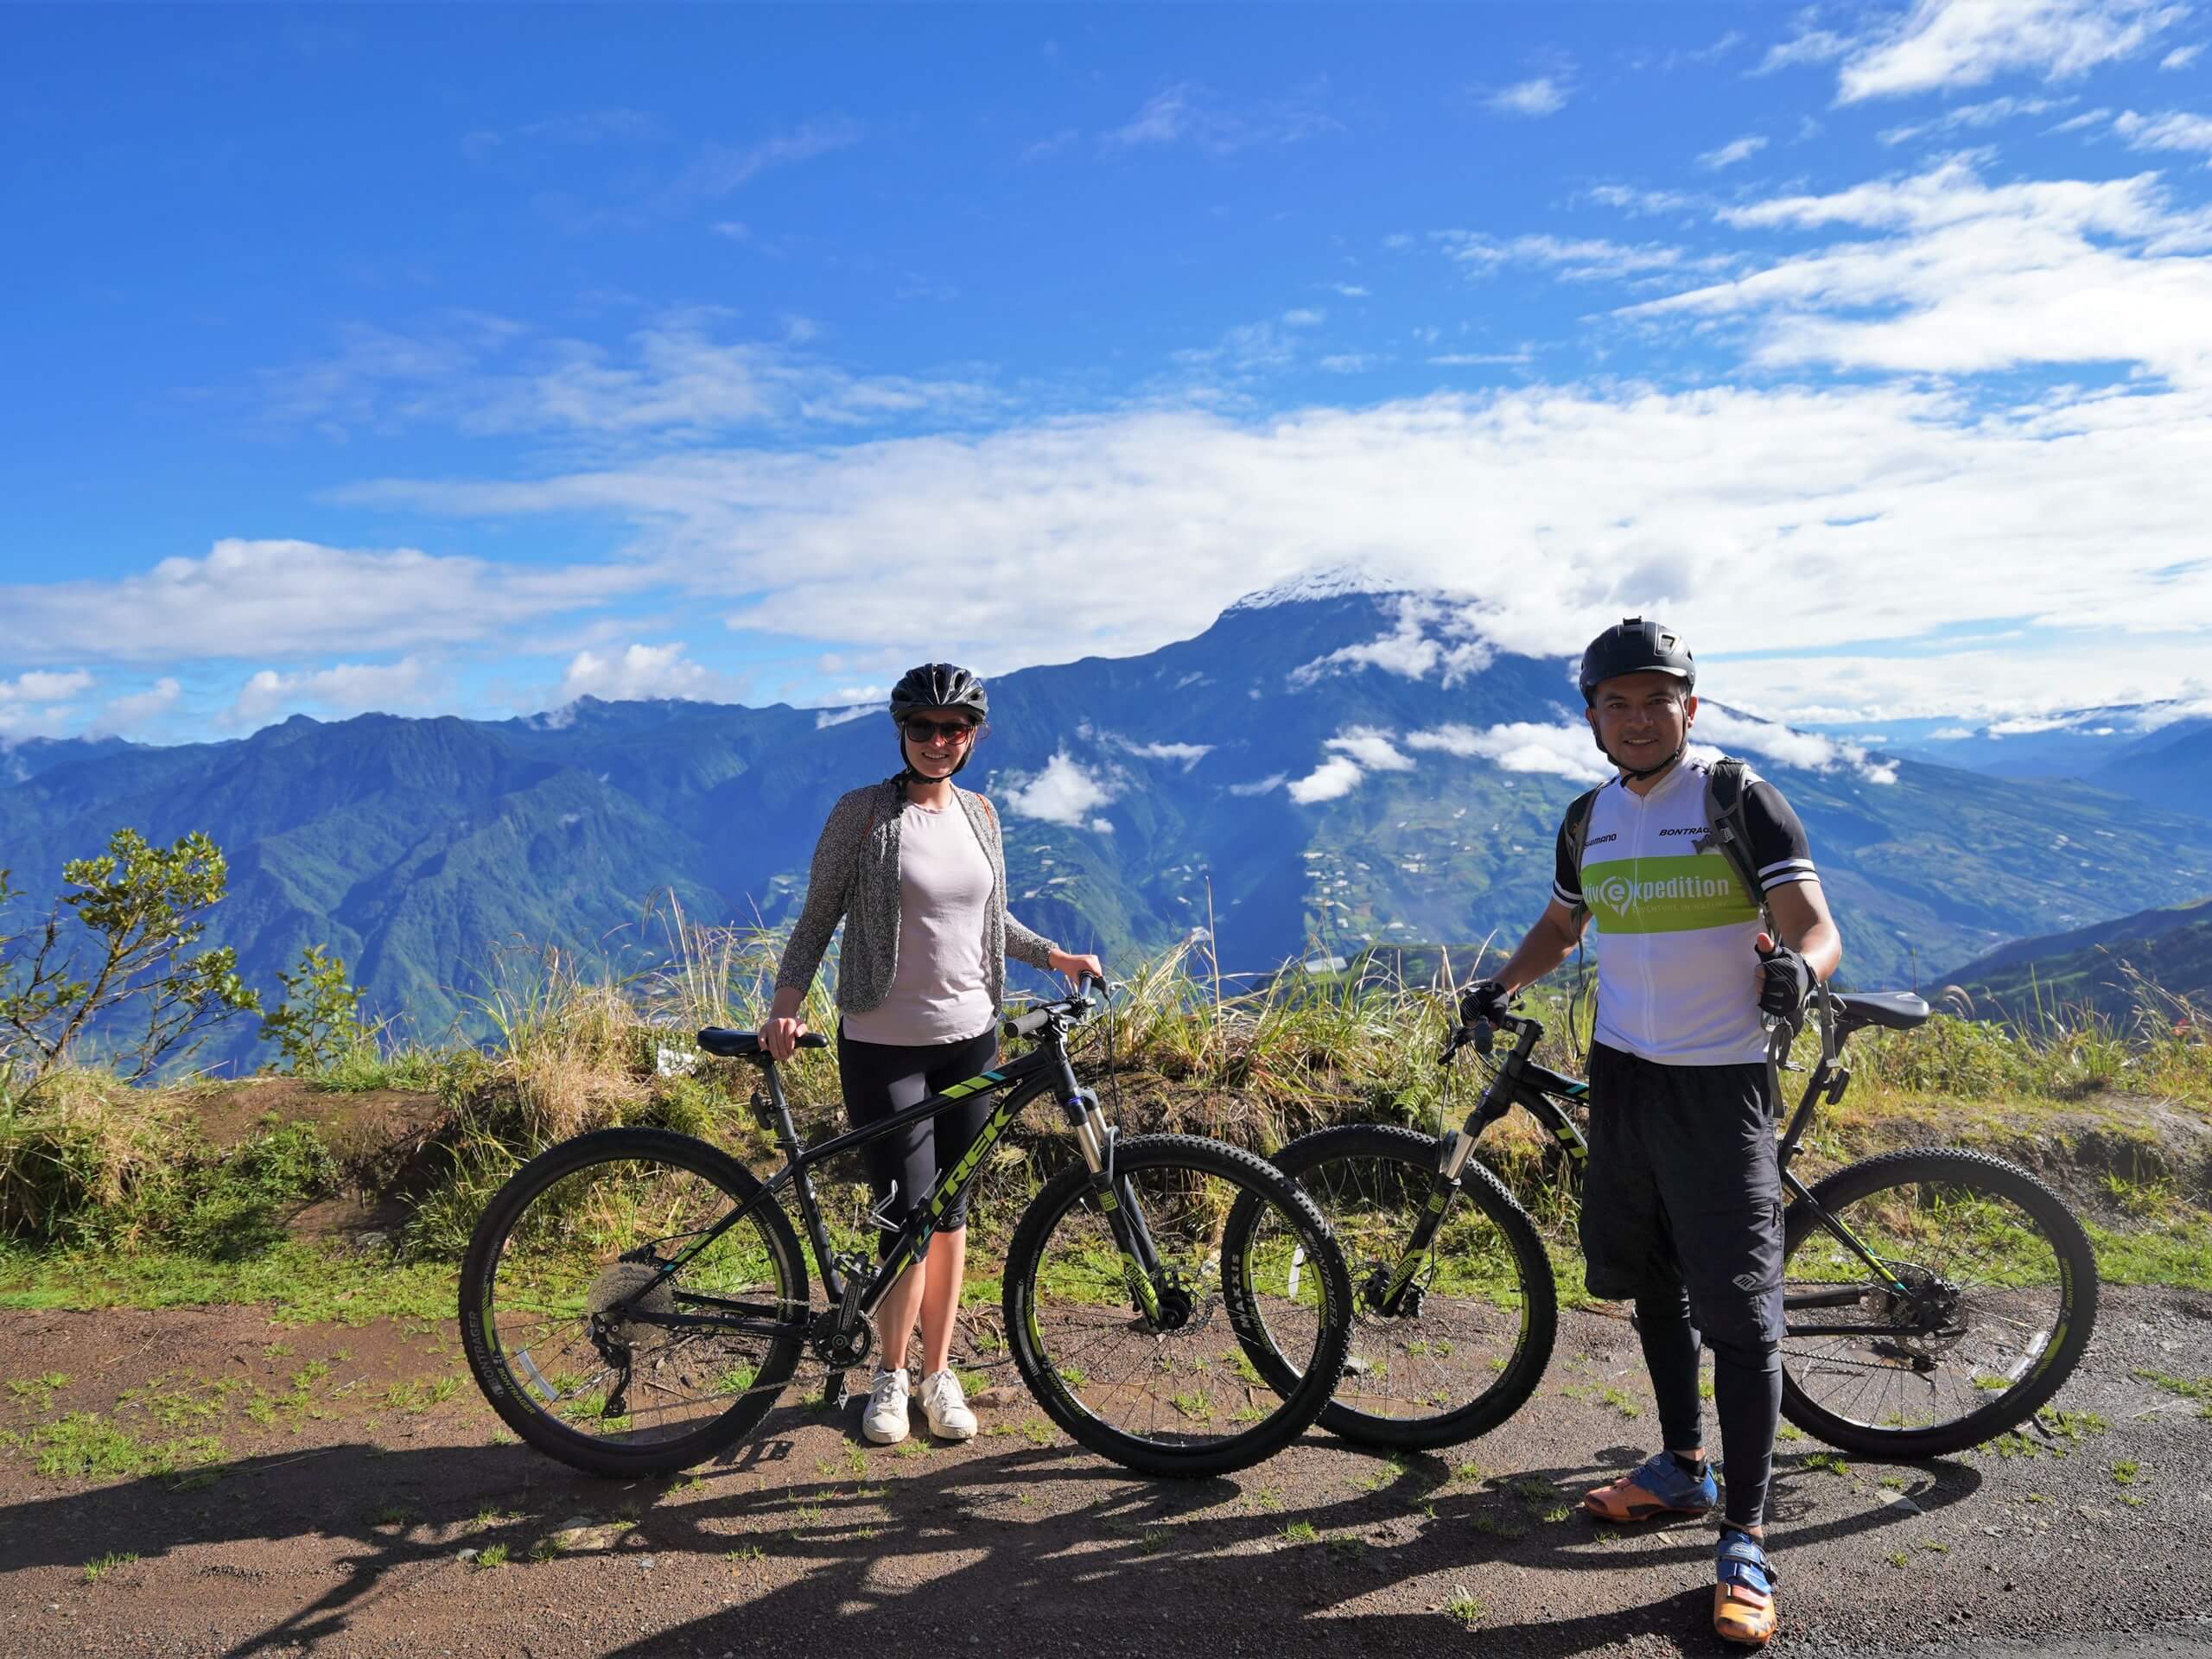 Cyclists posing in front of the stunning mountains in Ecuador